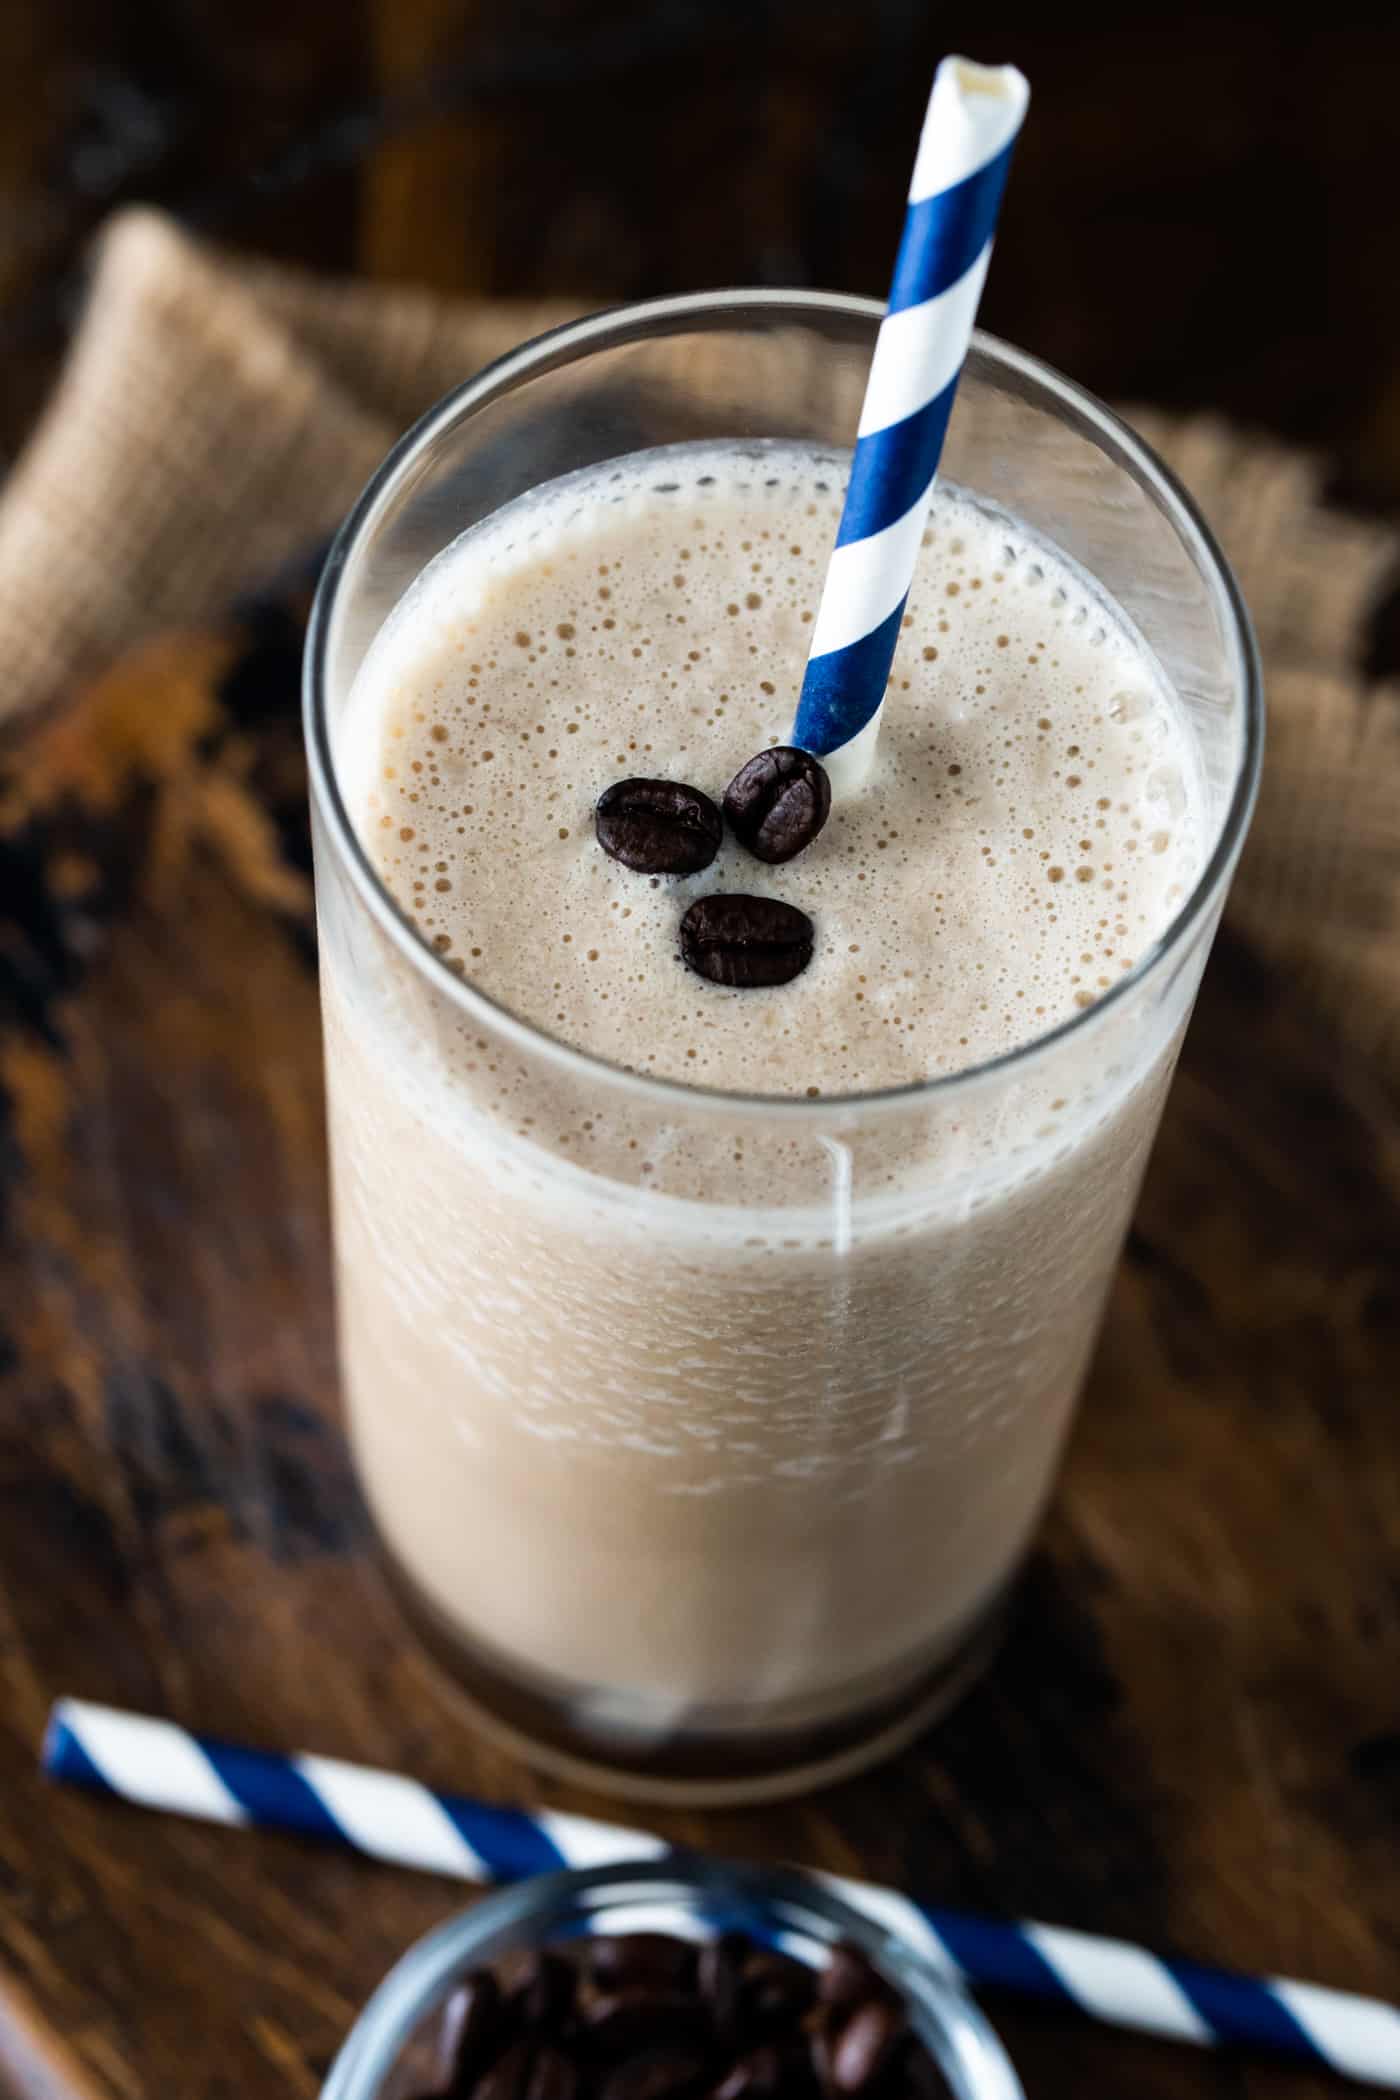 smoothie in a high ball glass on a dark background. Garnished with coffee beans and a straw.